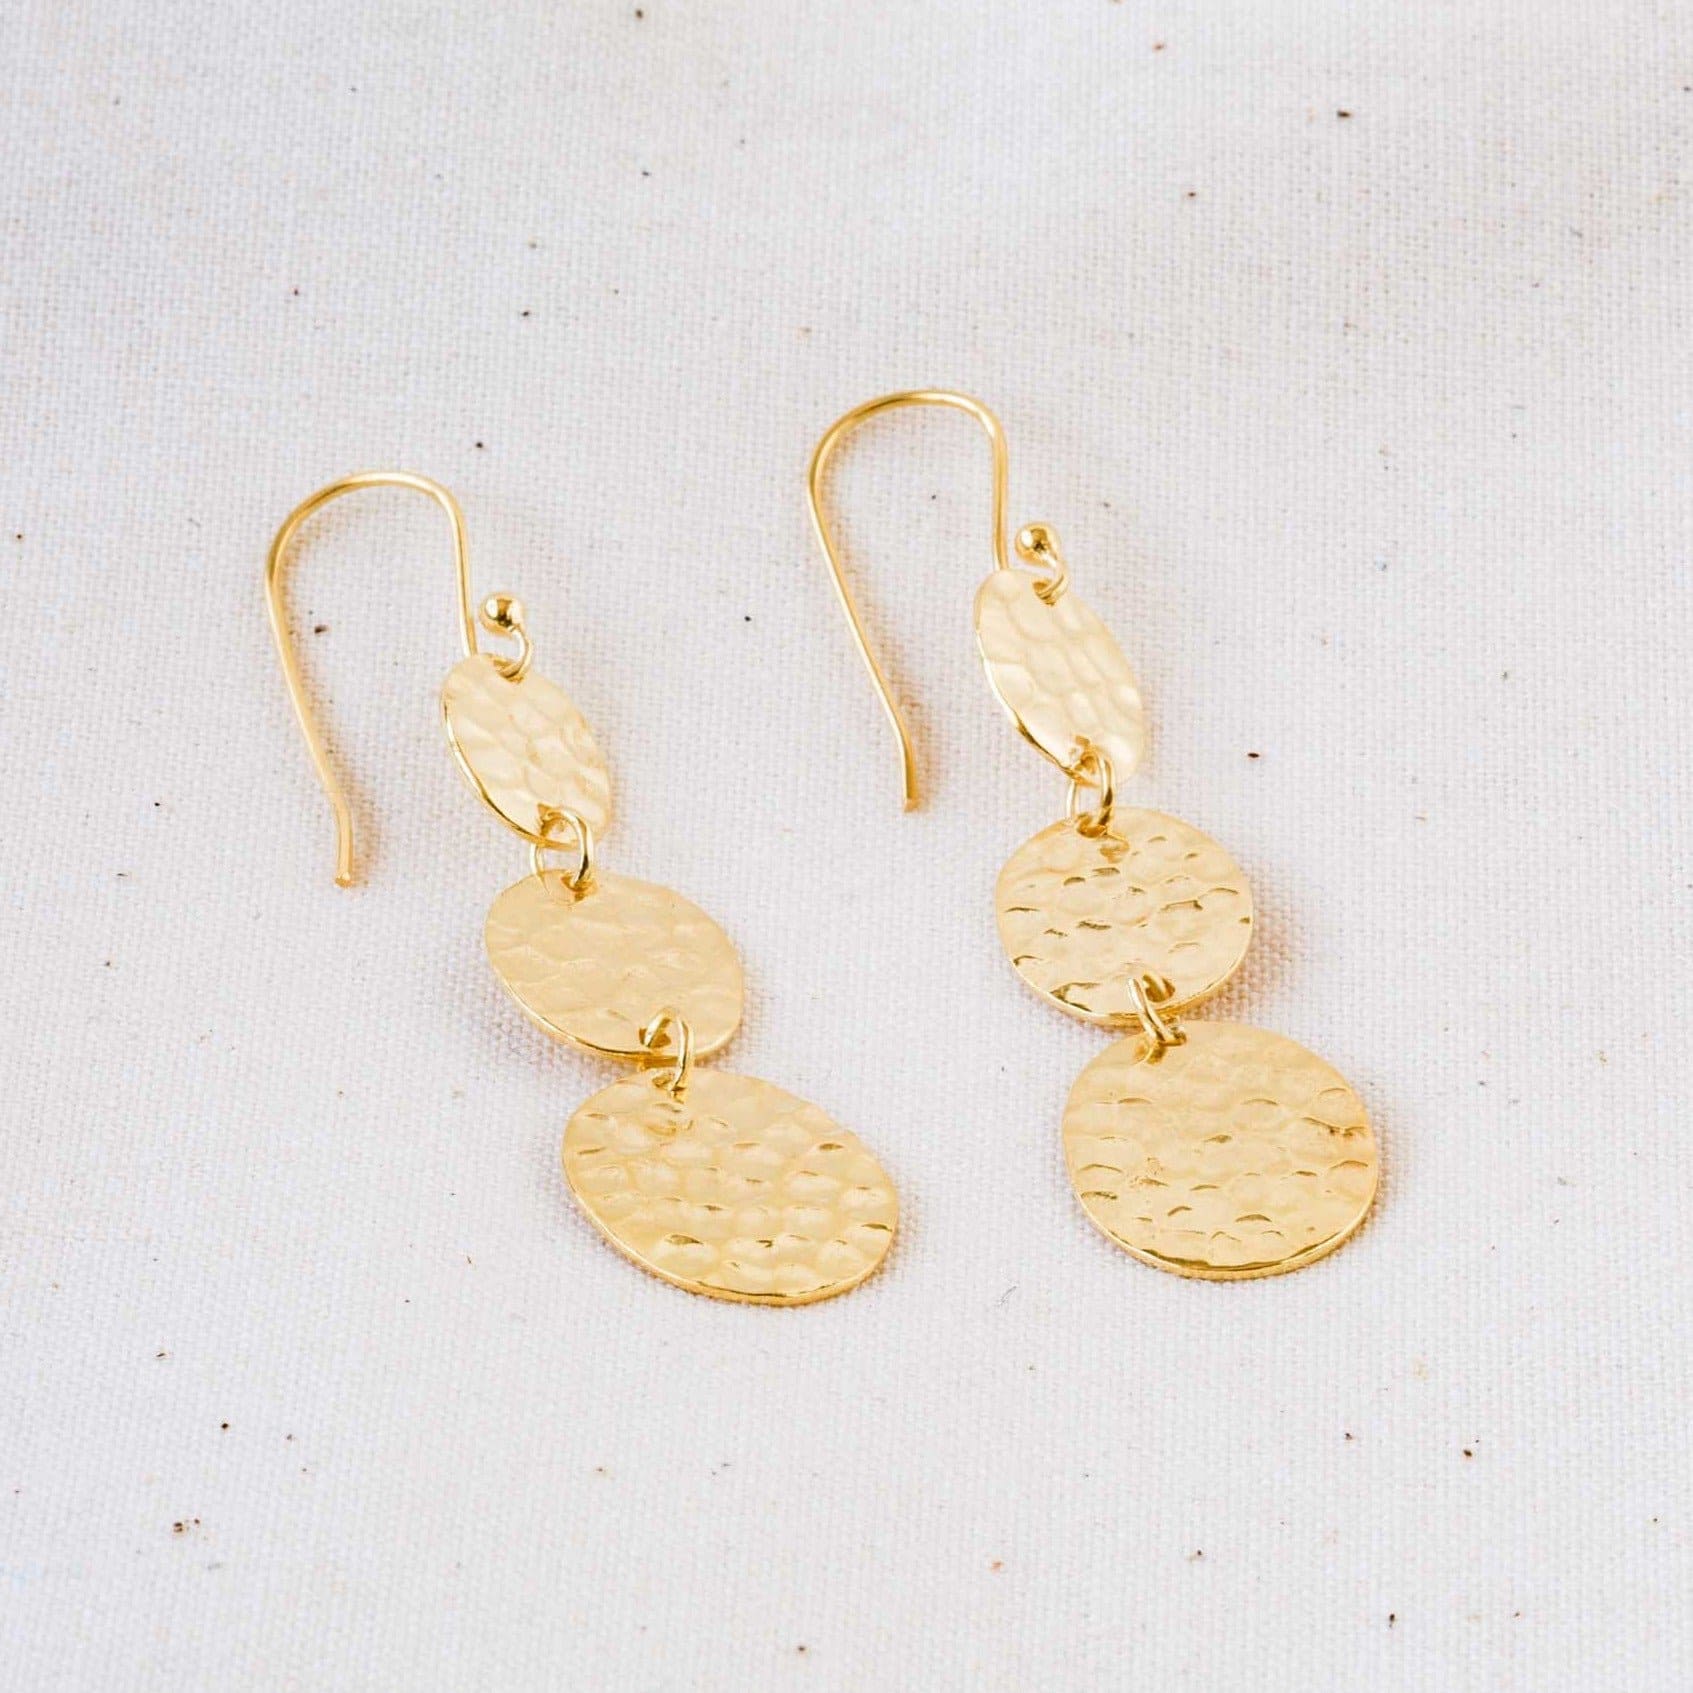 XL Hammered Yellow Gold Disc Earrings | Van Peterson London